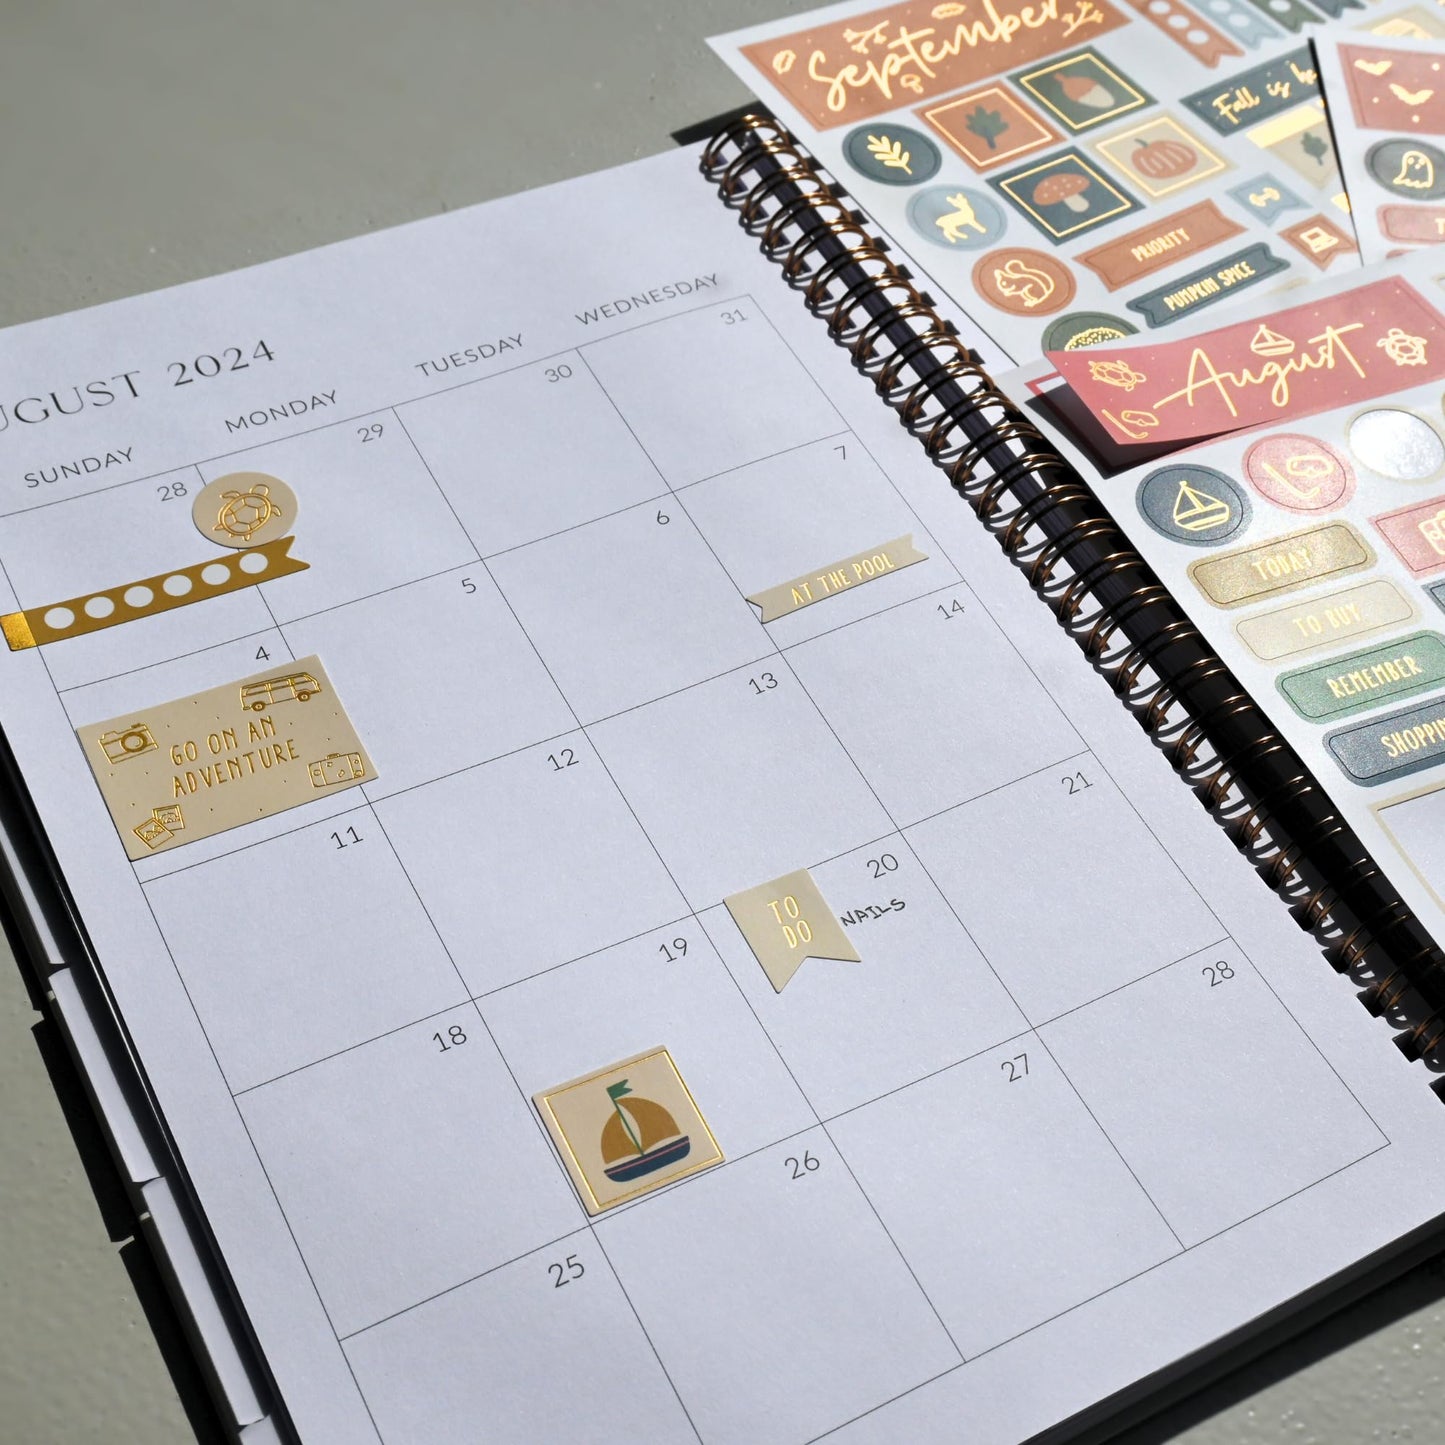 Aesthetic Gold Foil Planner Stickers for Fun Planning - 700+ Monthly Minimalist Designs for Your Calendar or Scrapbook - The Perfect Sticker Accessories to Enhance Your Daily Bullet Journaling